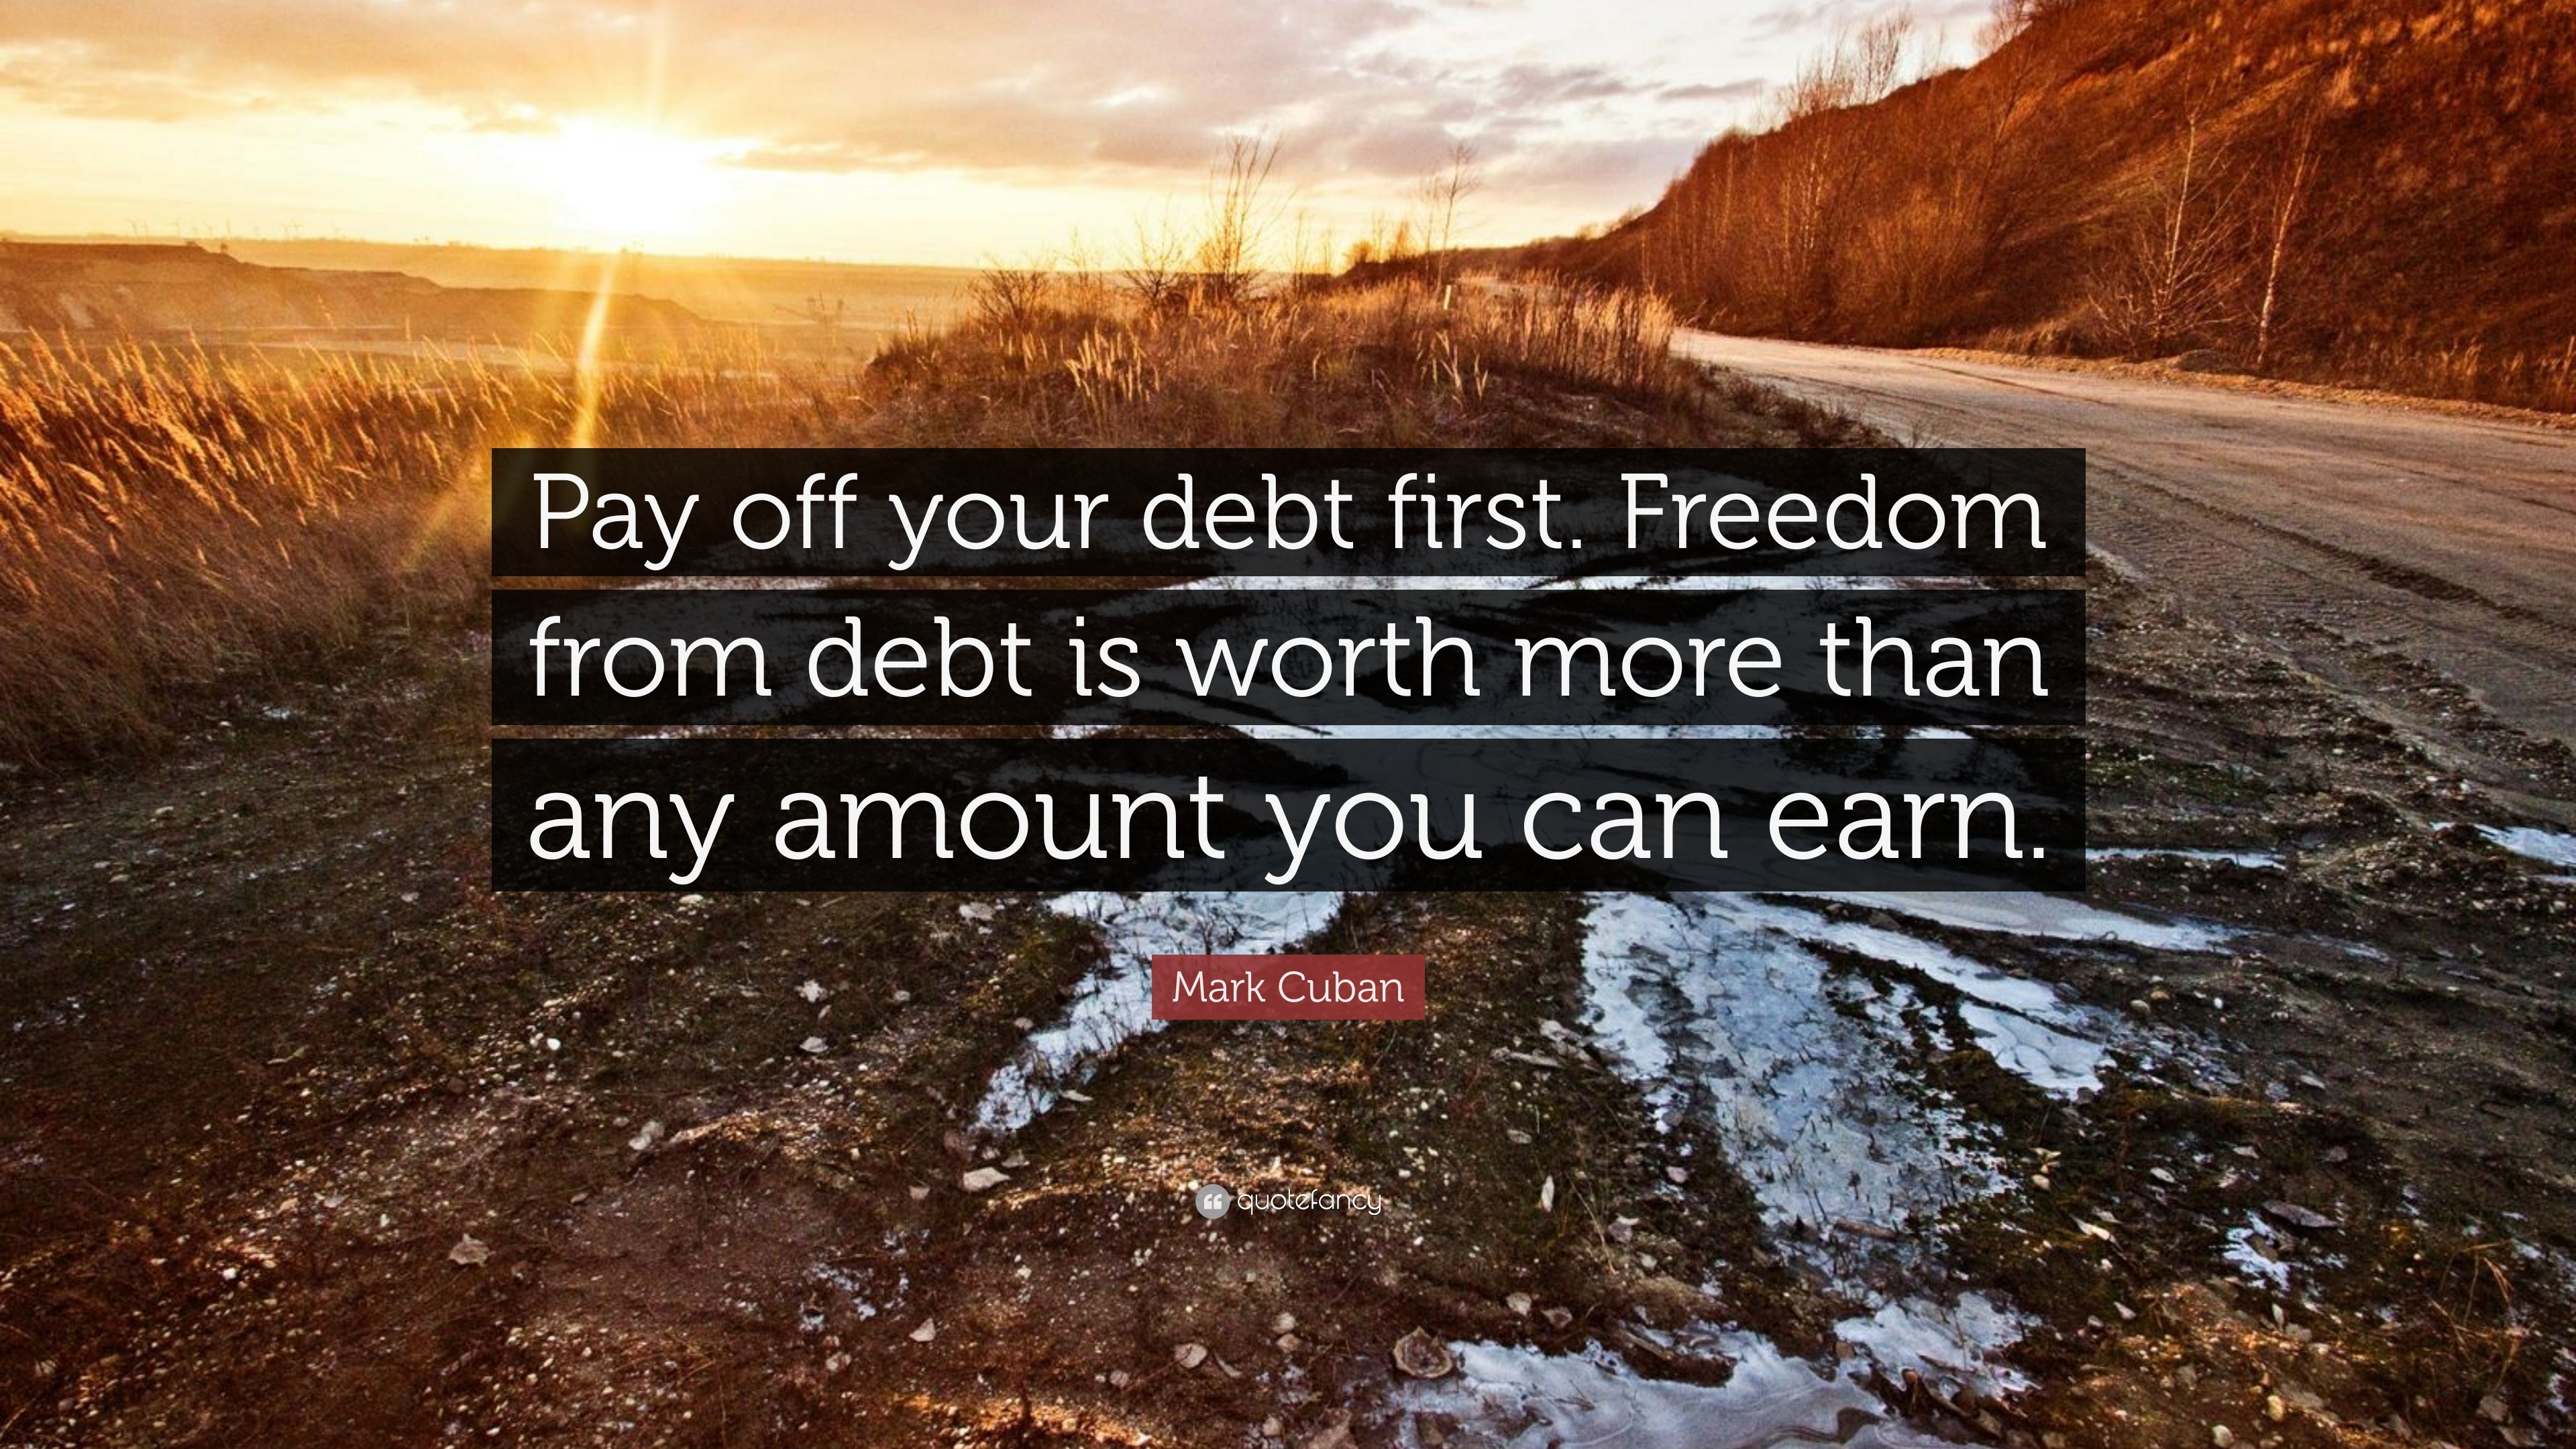 Mark Cuban Quote “Pay off your debt first. Freedom from debt is worth